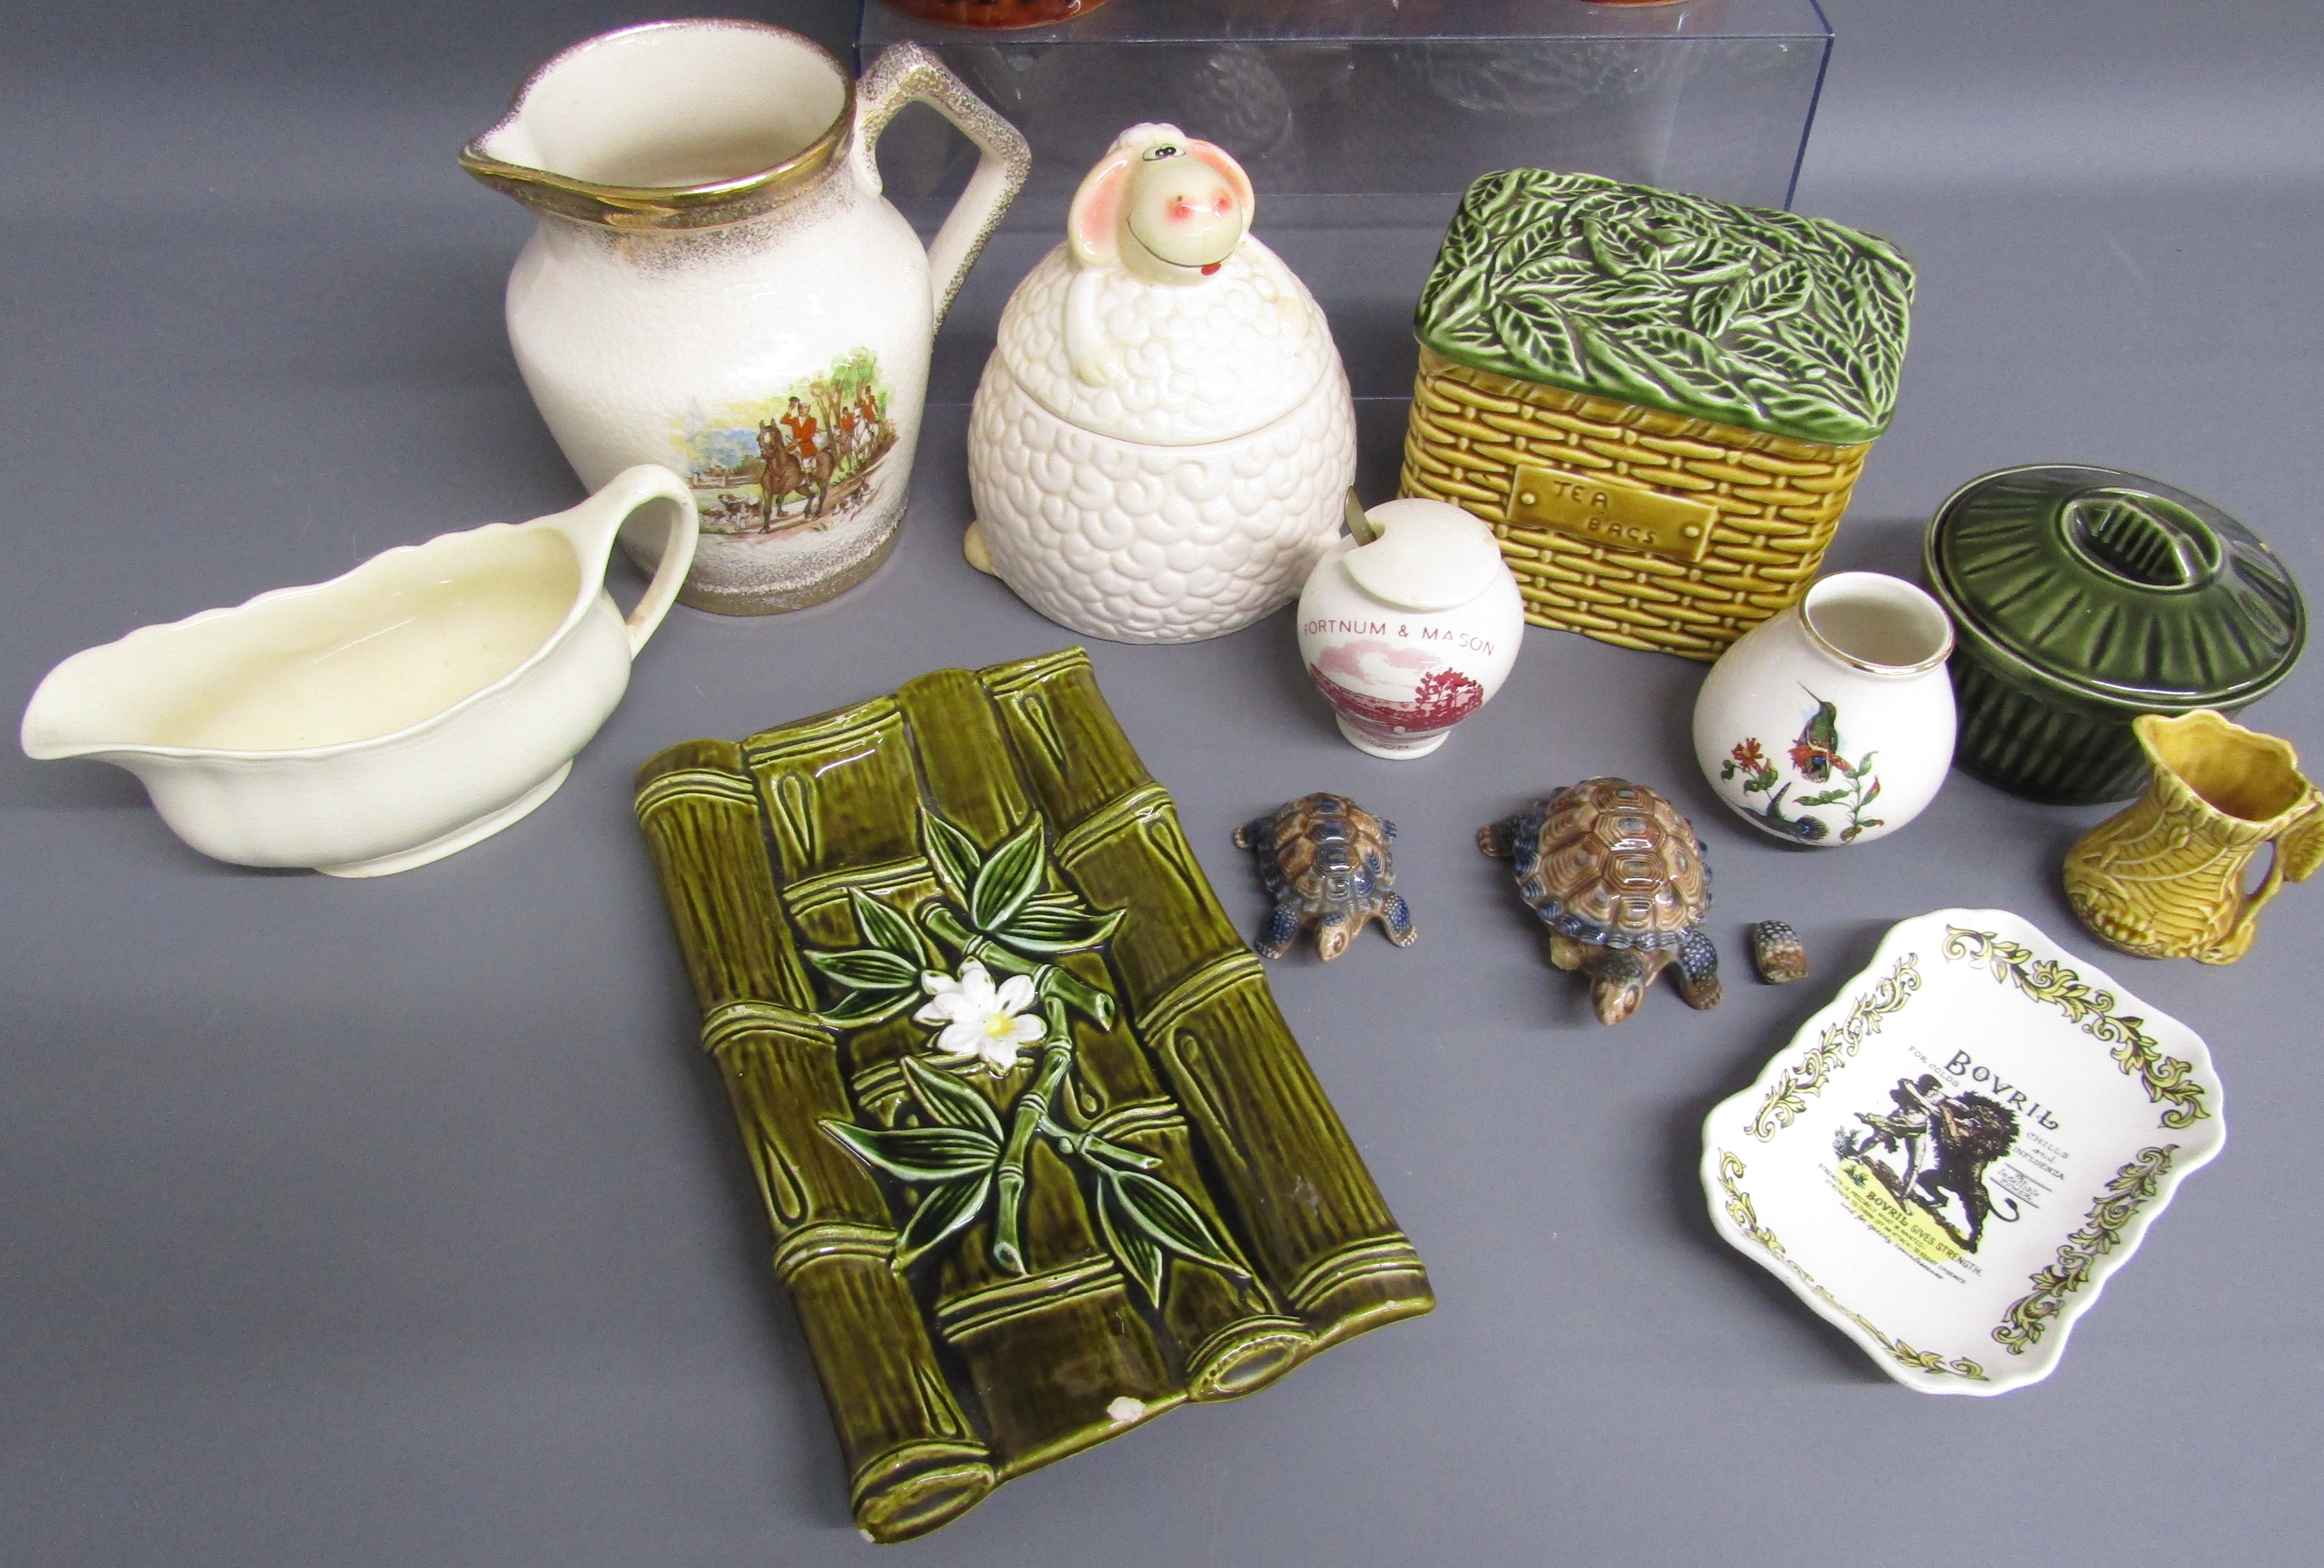 Collection of ceramics includes P&K figural tea, coffee and sugar pots, jugs, Meakin gravy boat, - Image 2 of 3